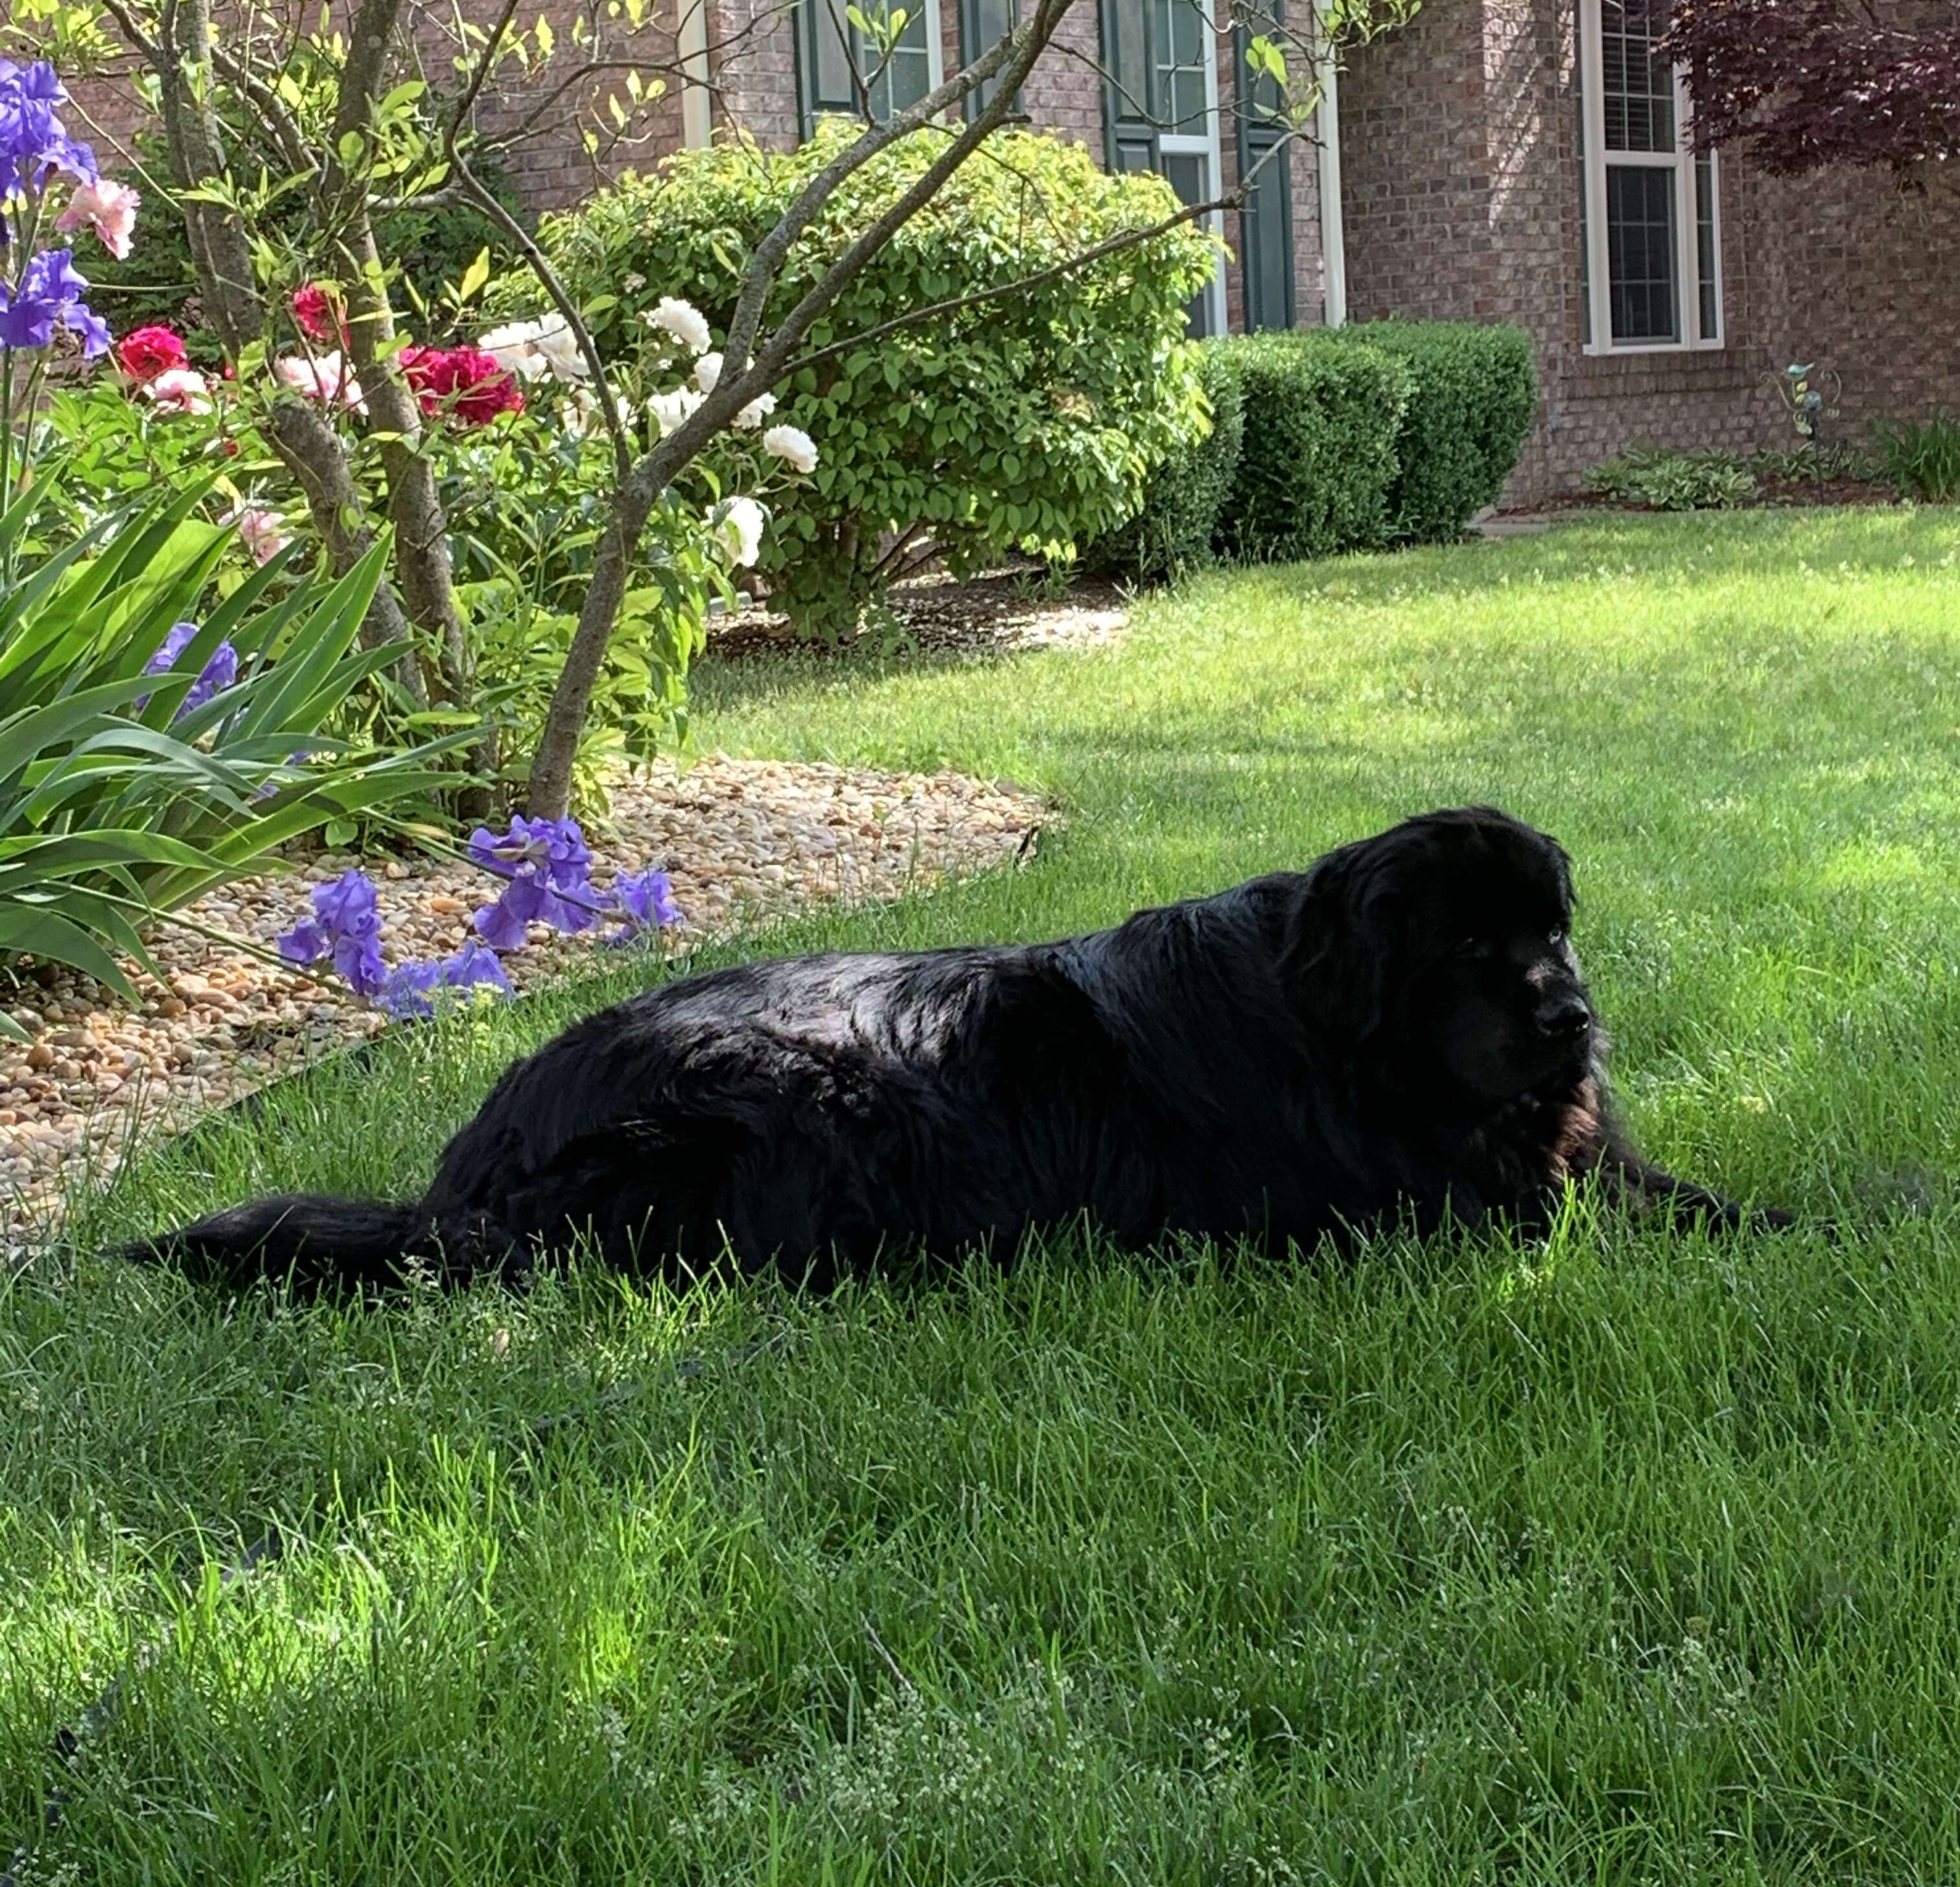 Foxtrot the Newfoundland dog waits for his toad friend